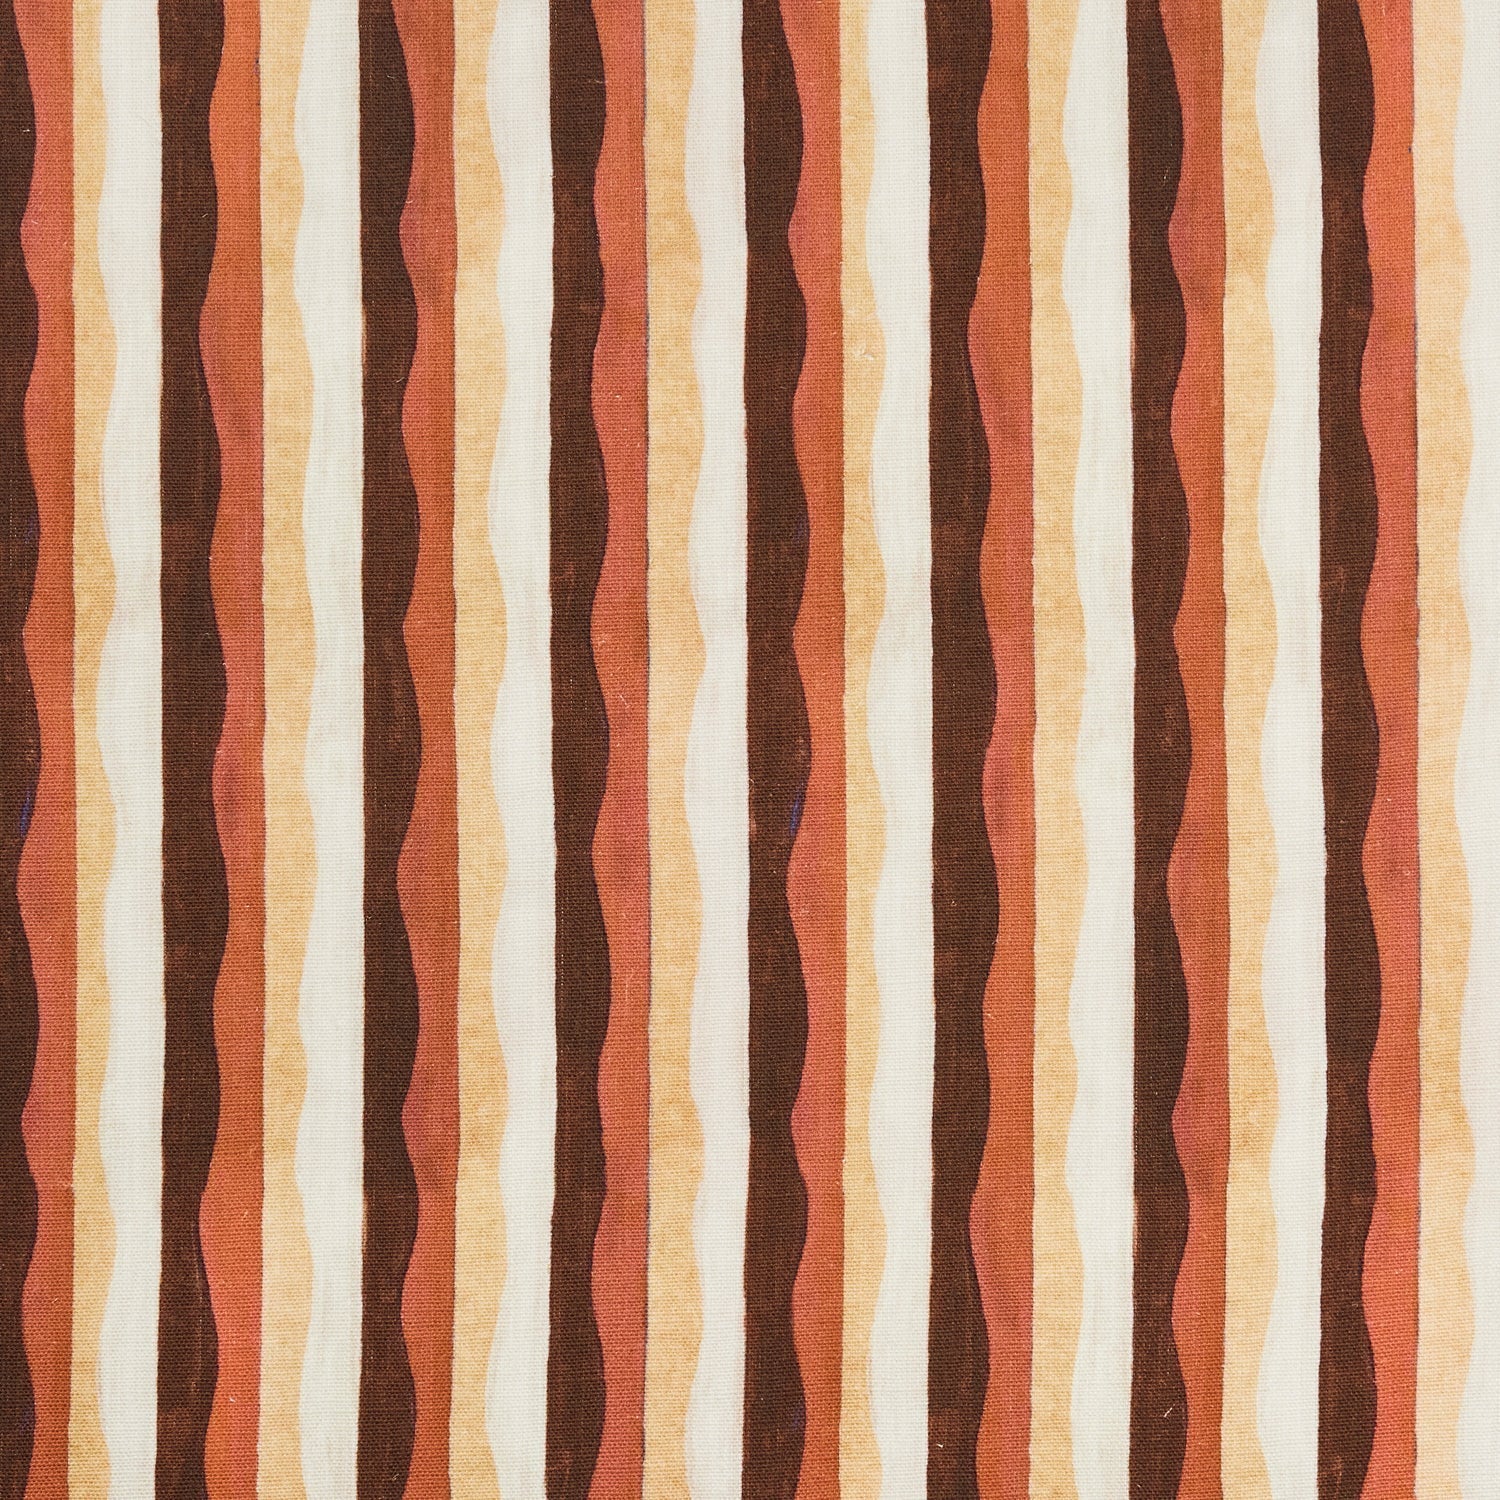 Woven fabric swatch in a curvy hand-painted stripe pattern in shades of brown, gold, rust and white.